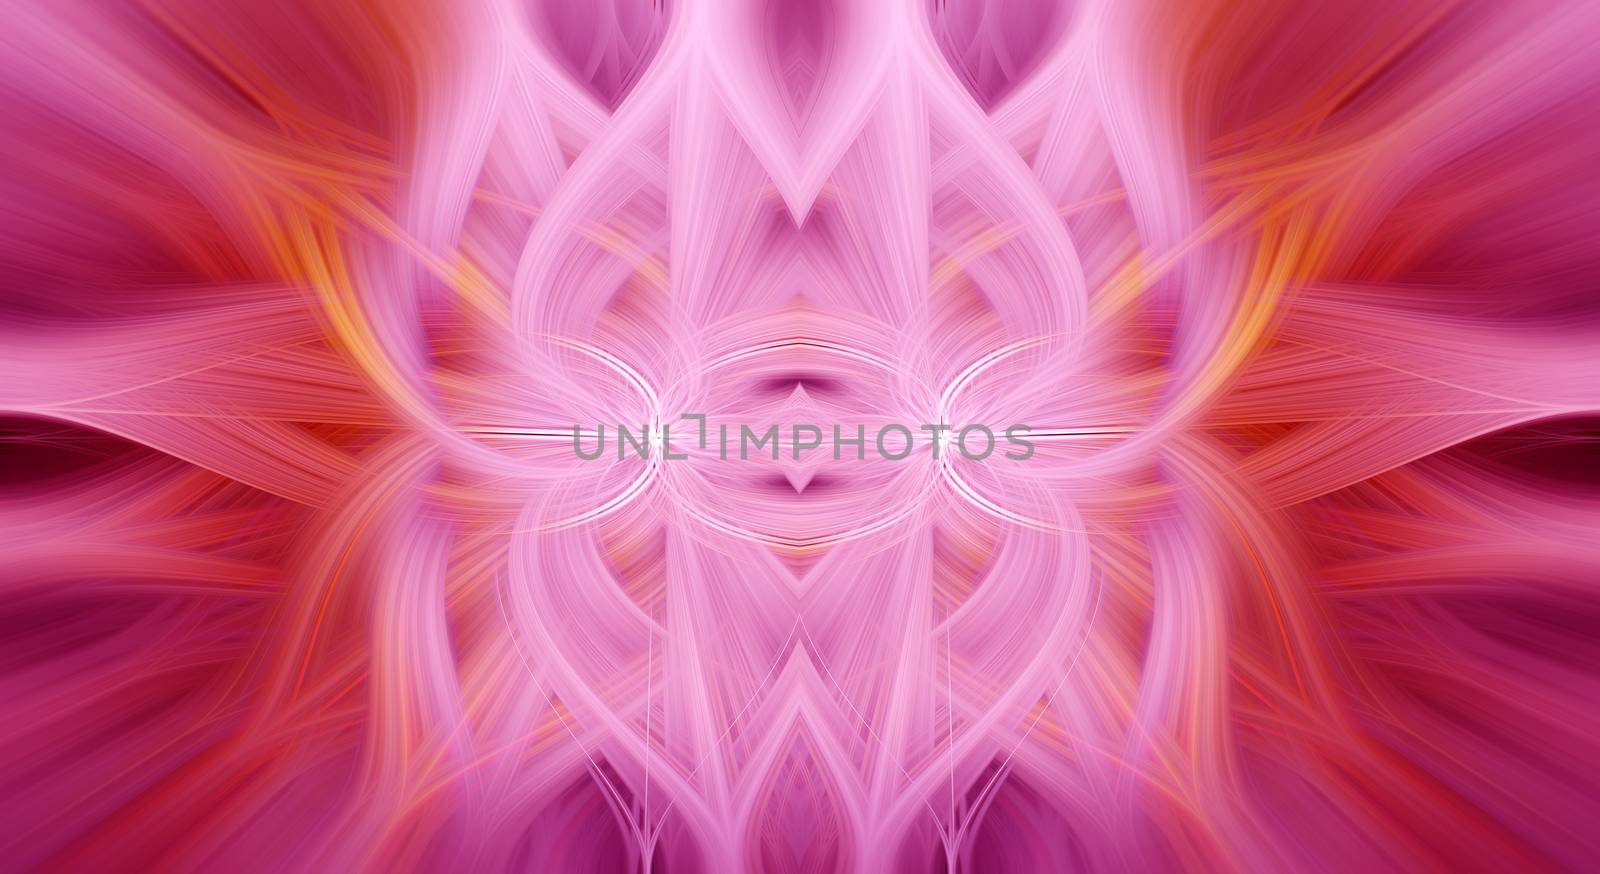 Beautiful abstract intertwined 3d fibers forming an ornament out of various symmetrical shapes. Purple, pink, red, yellow colors. Illustration.